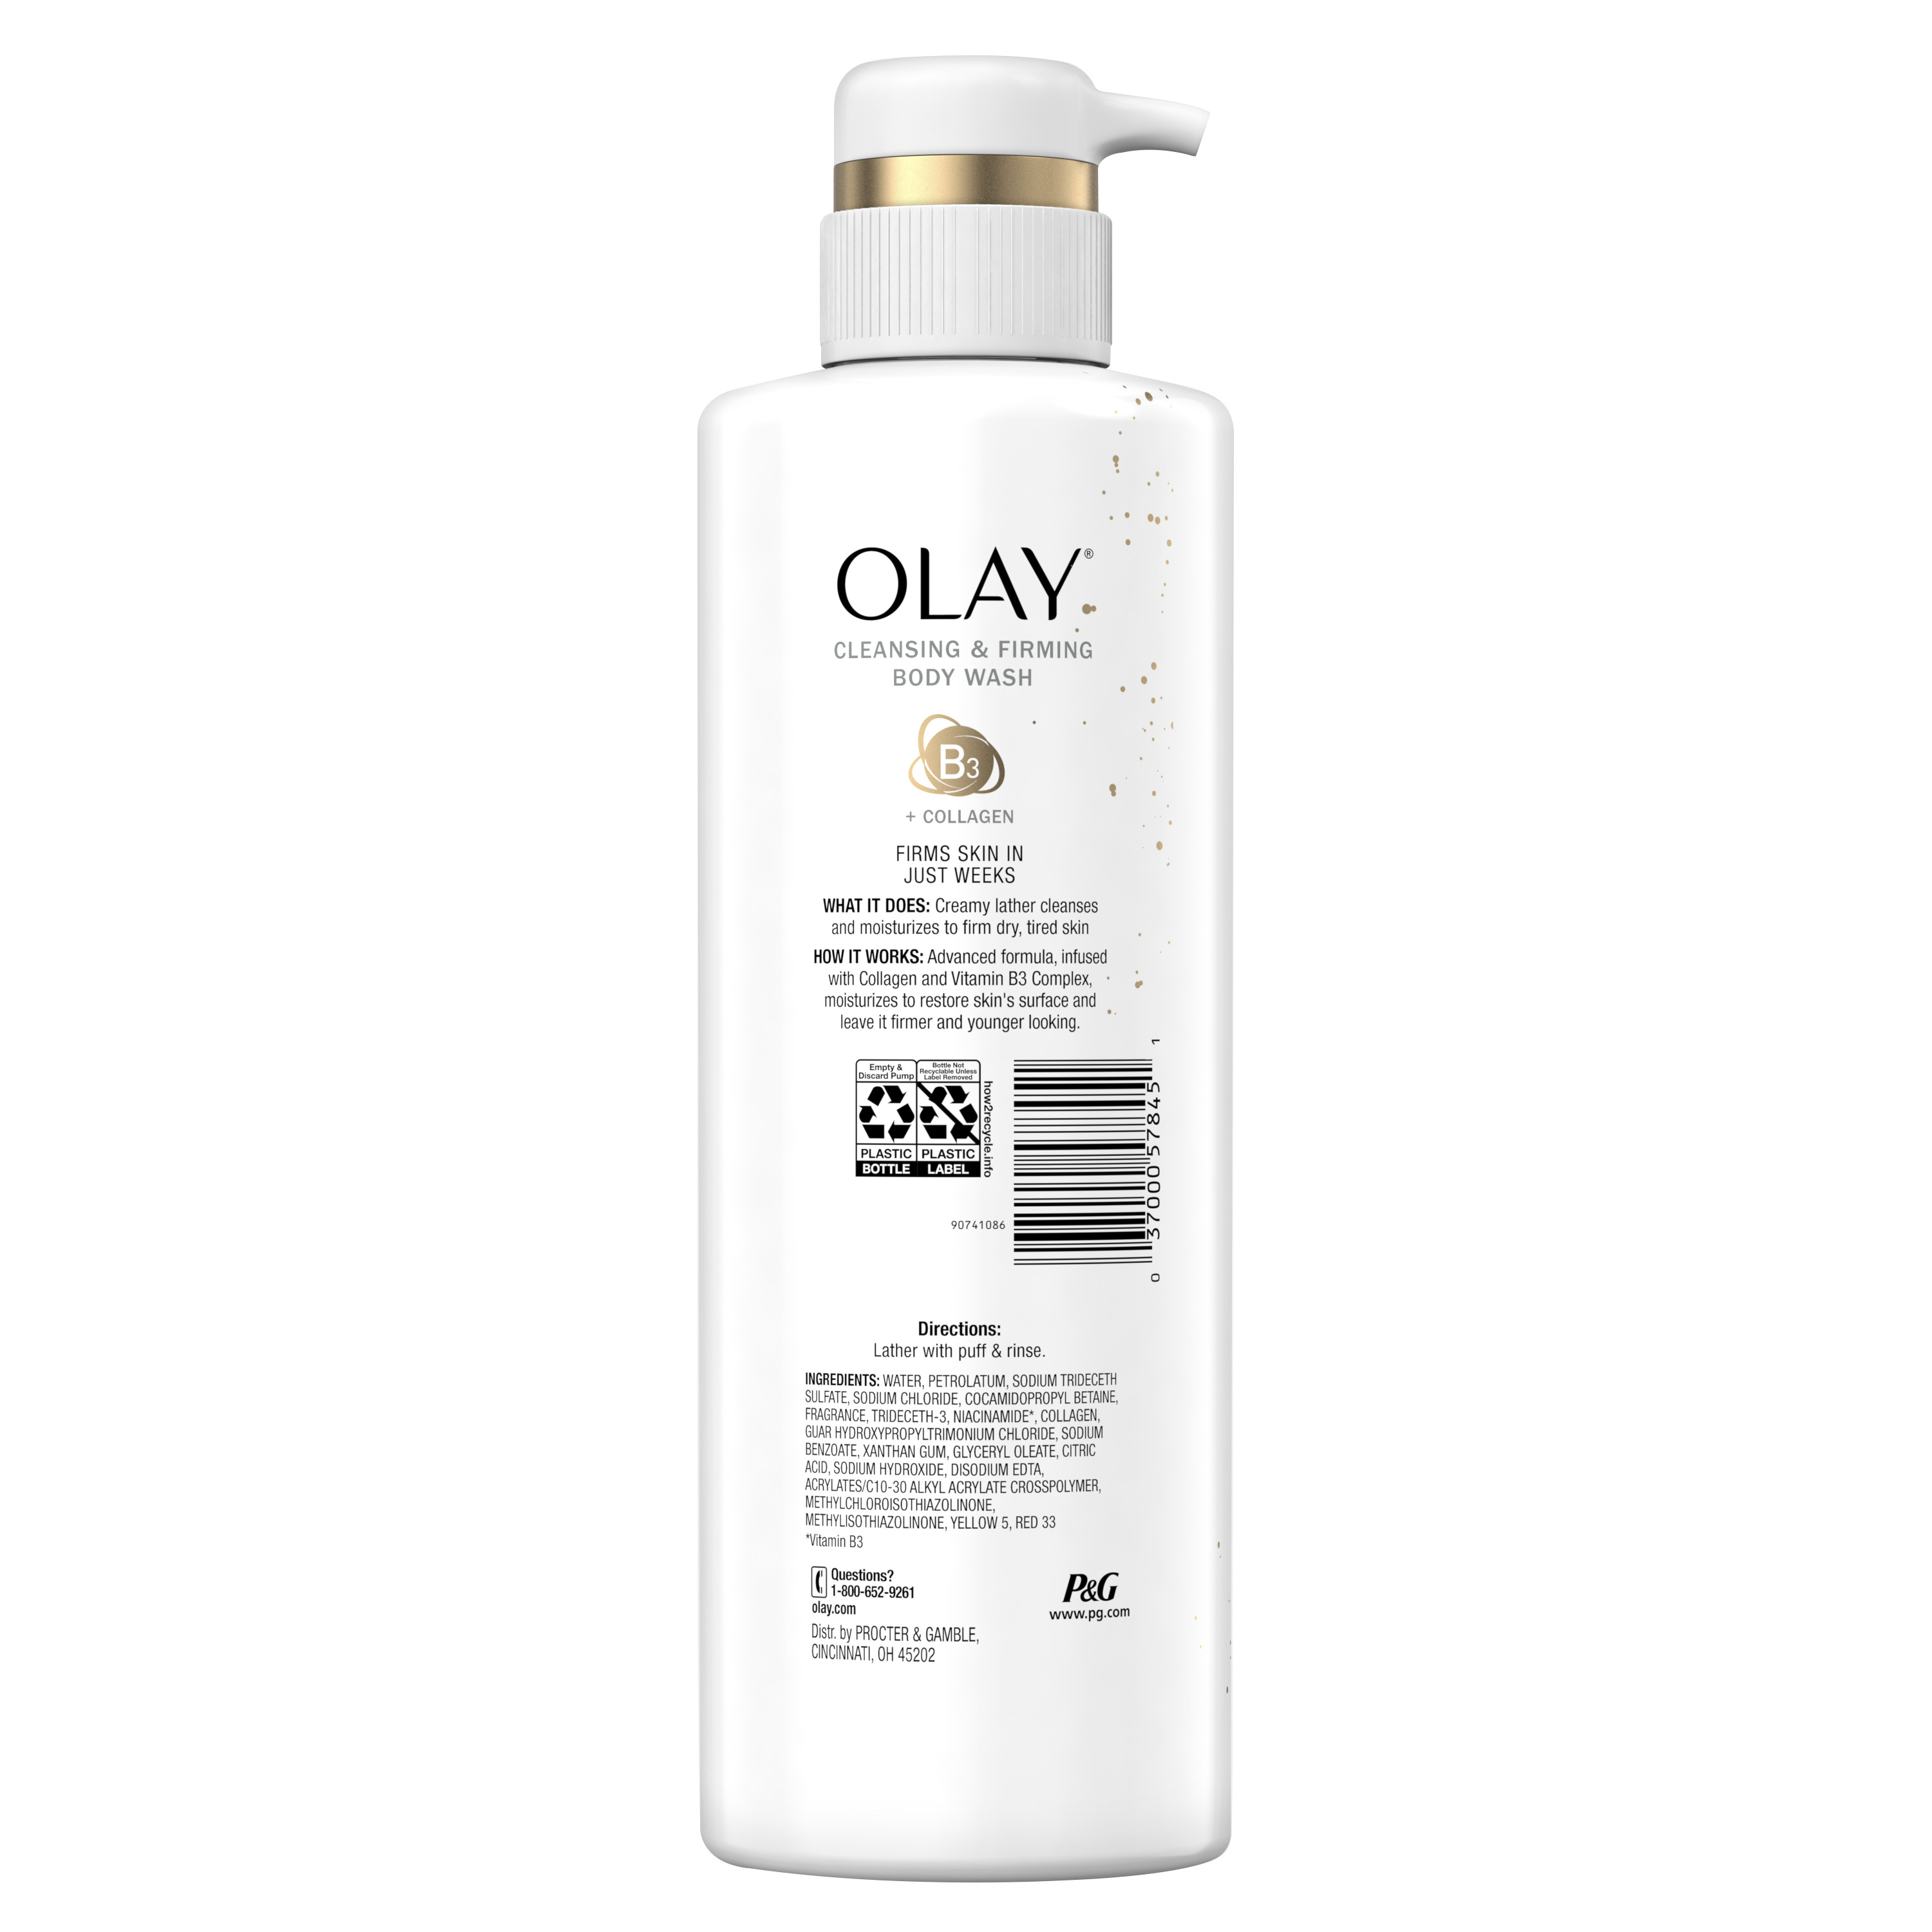 Olay Cleansing & Firming Body Wash with Vitamin B3 and Collagen, 17.9 fl oz - image 4 of 7